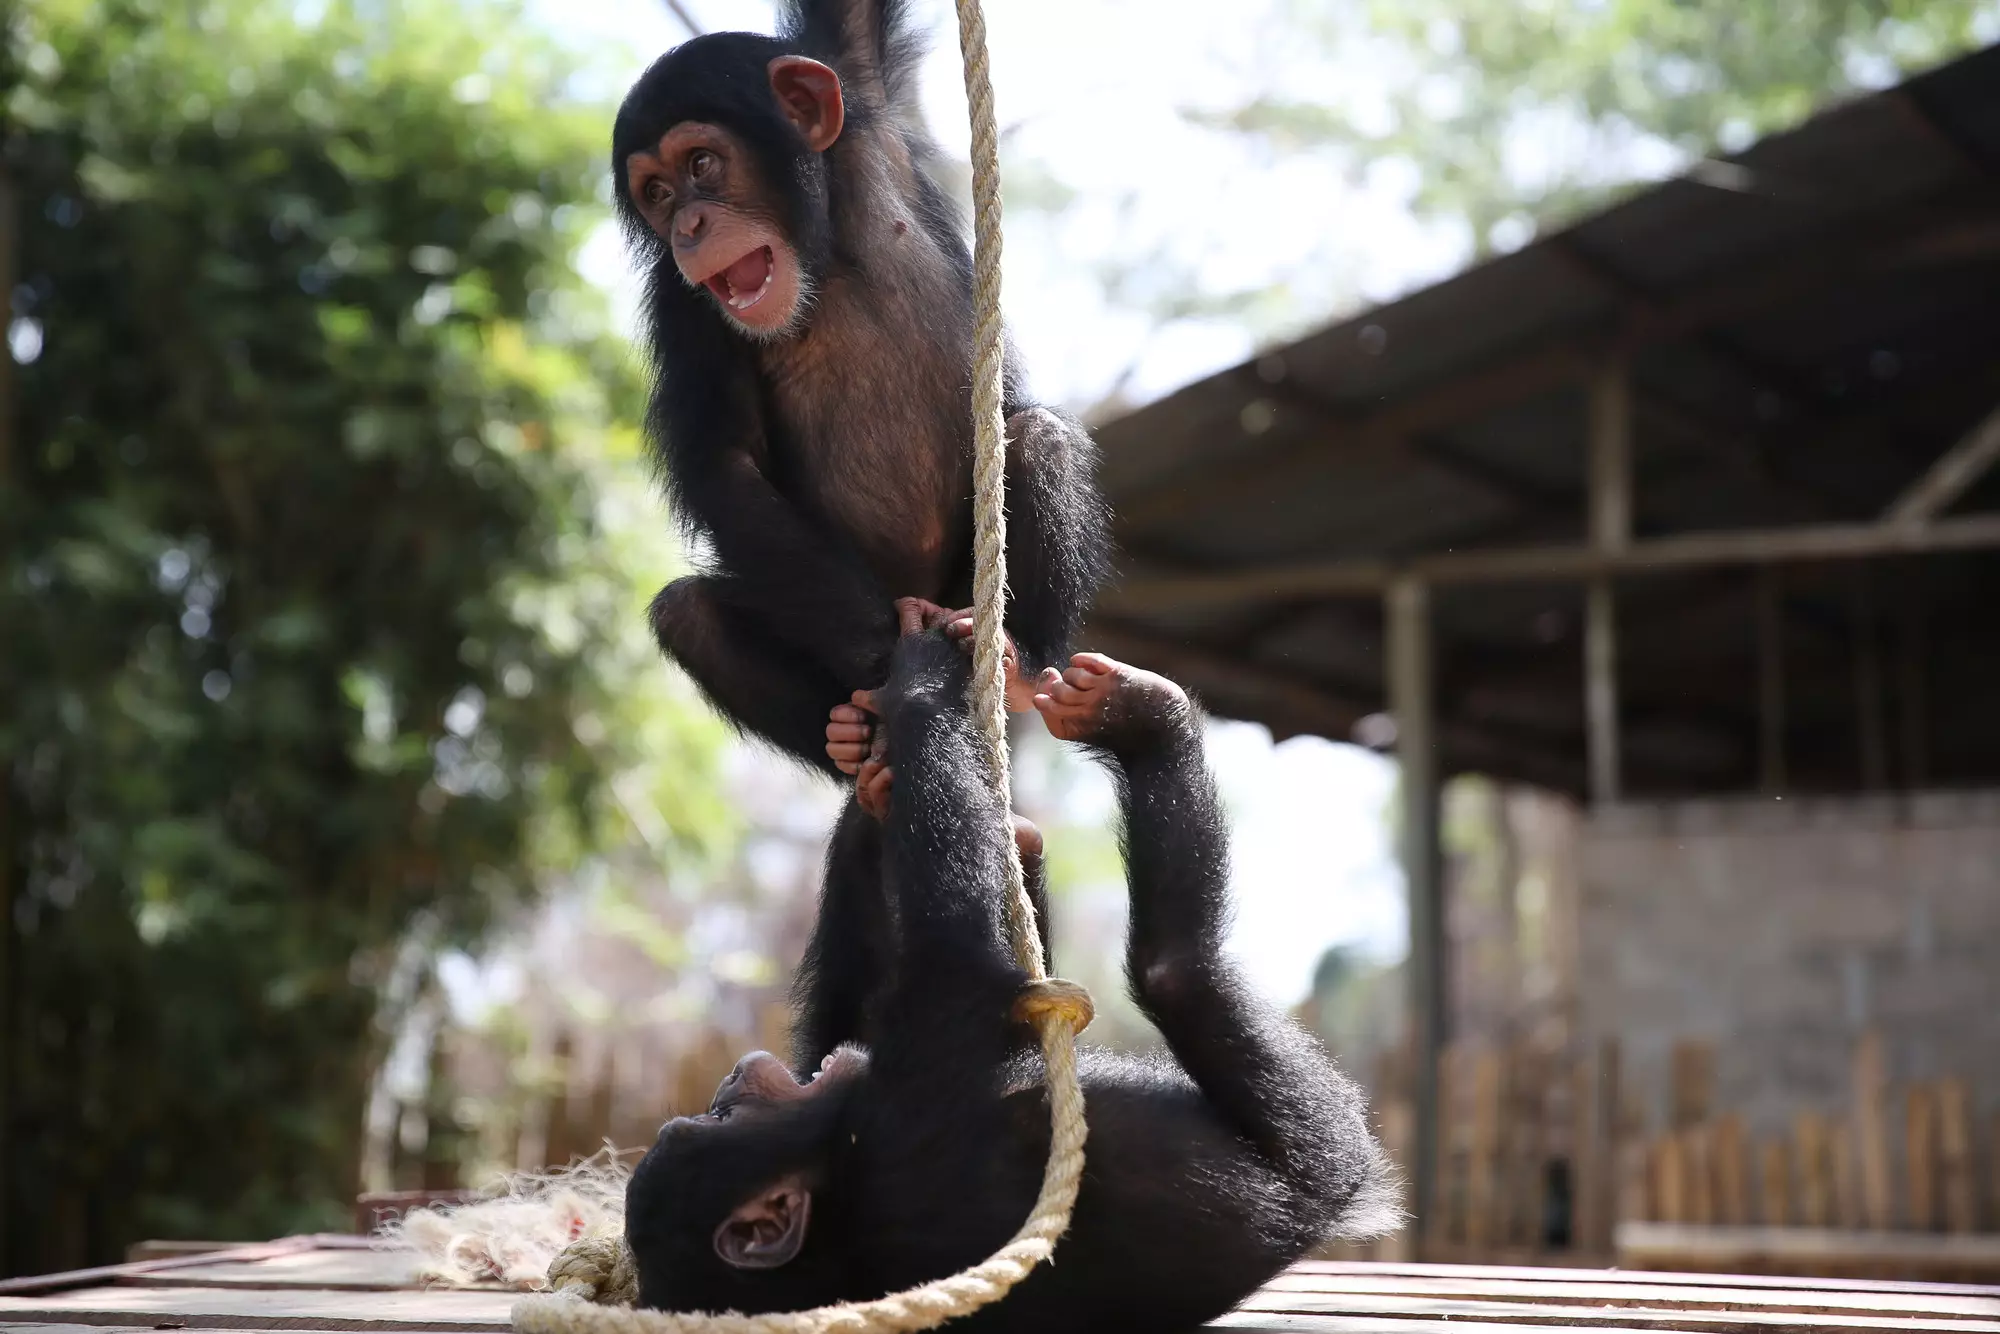 Wild chimpanzee mothers are often killed for bush meat, while their babies are traded illegally as expensive pets (